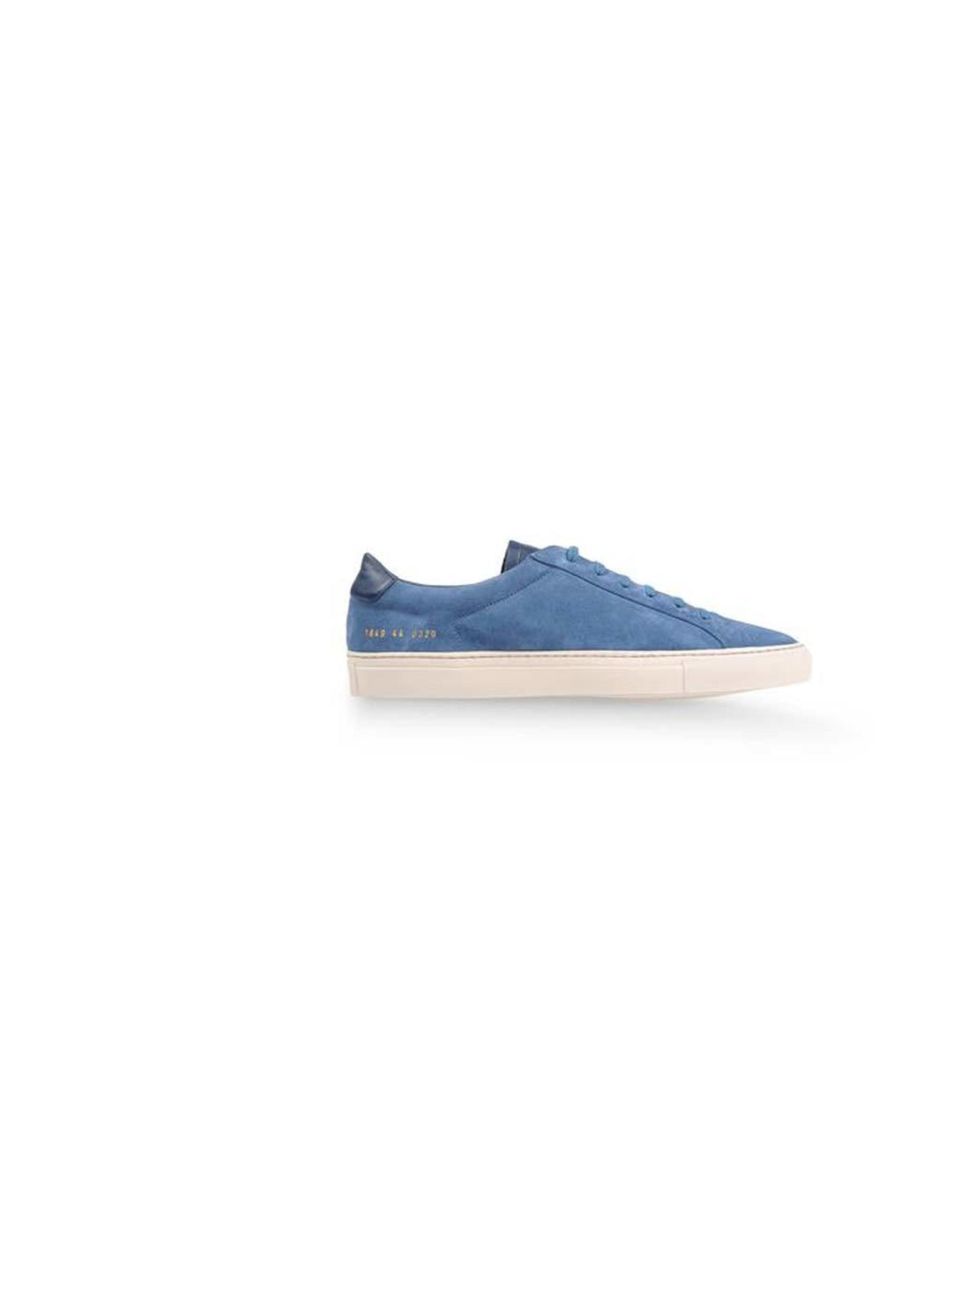 <p>A pair of blue suede <a href="http://www.thecorner.com/gb/men/sneakers_cod44570857wq.html">Common Projects</a> trainers, £194 add some casual cool</p>